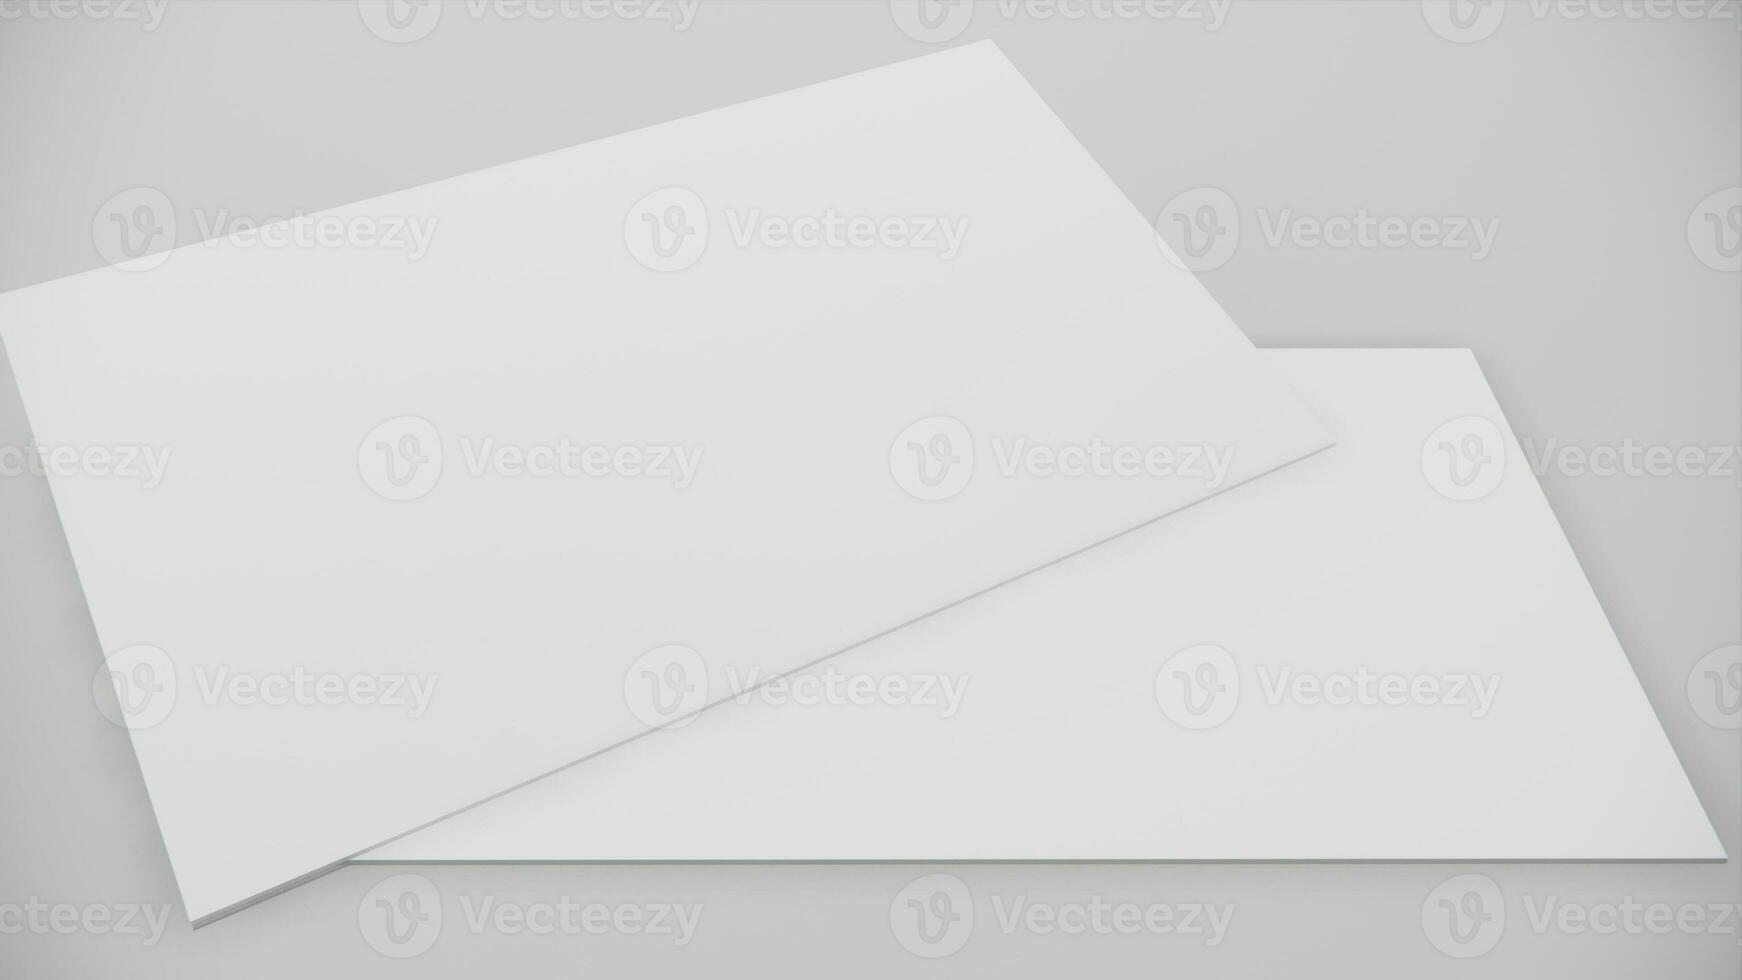 Modern business card mockup template with clipping path. Mock-up design for presentation branding, corporate identity, advertising, personal, stationery, graphic designers presentations. 3d Rendering photo